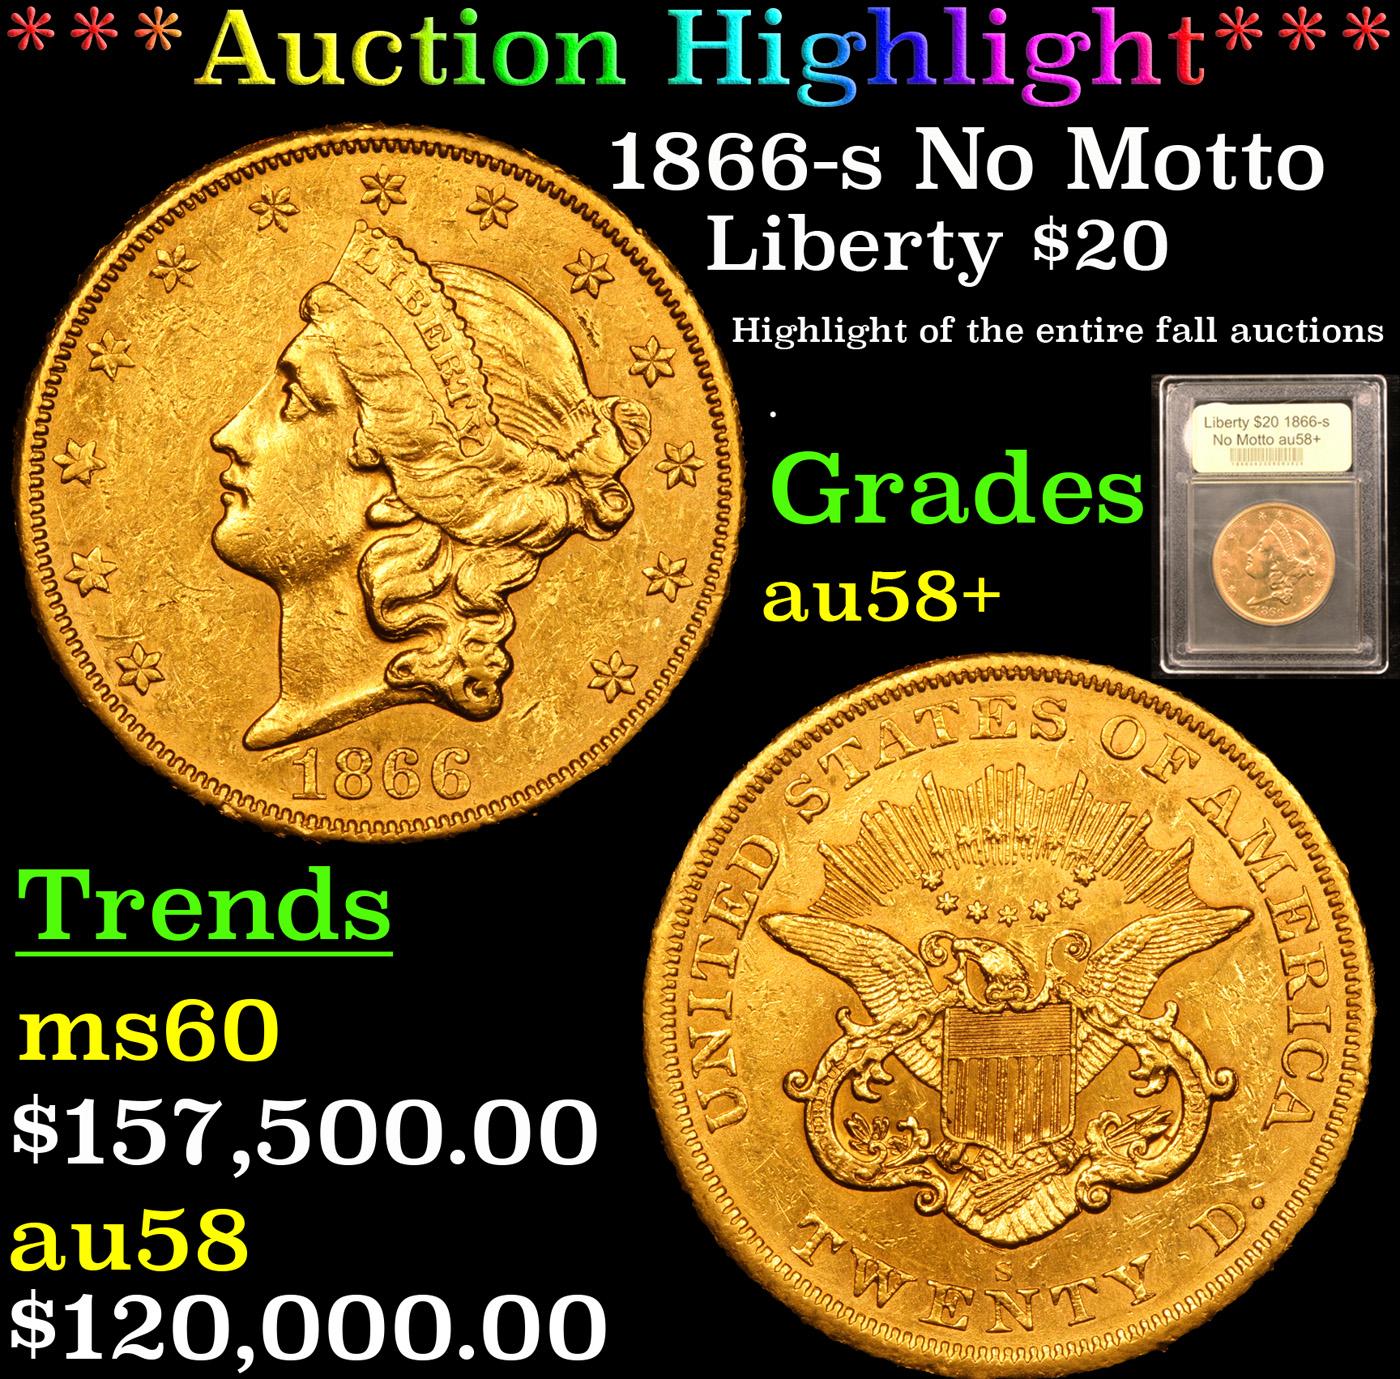 *Highlight OF ENTIRE AUCTION SERIES* 1866-s No Motto Gold Liberty $20 Choice AU/BU Slider+ By USCG (